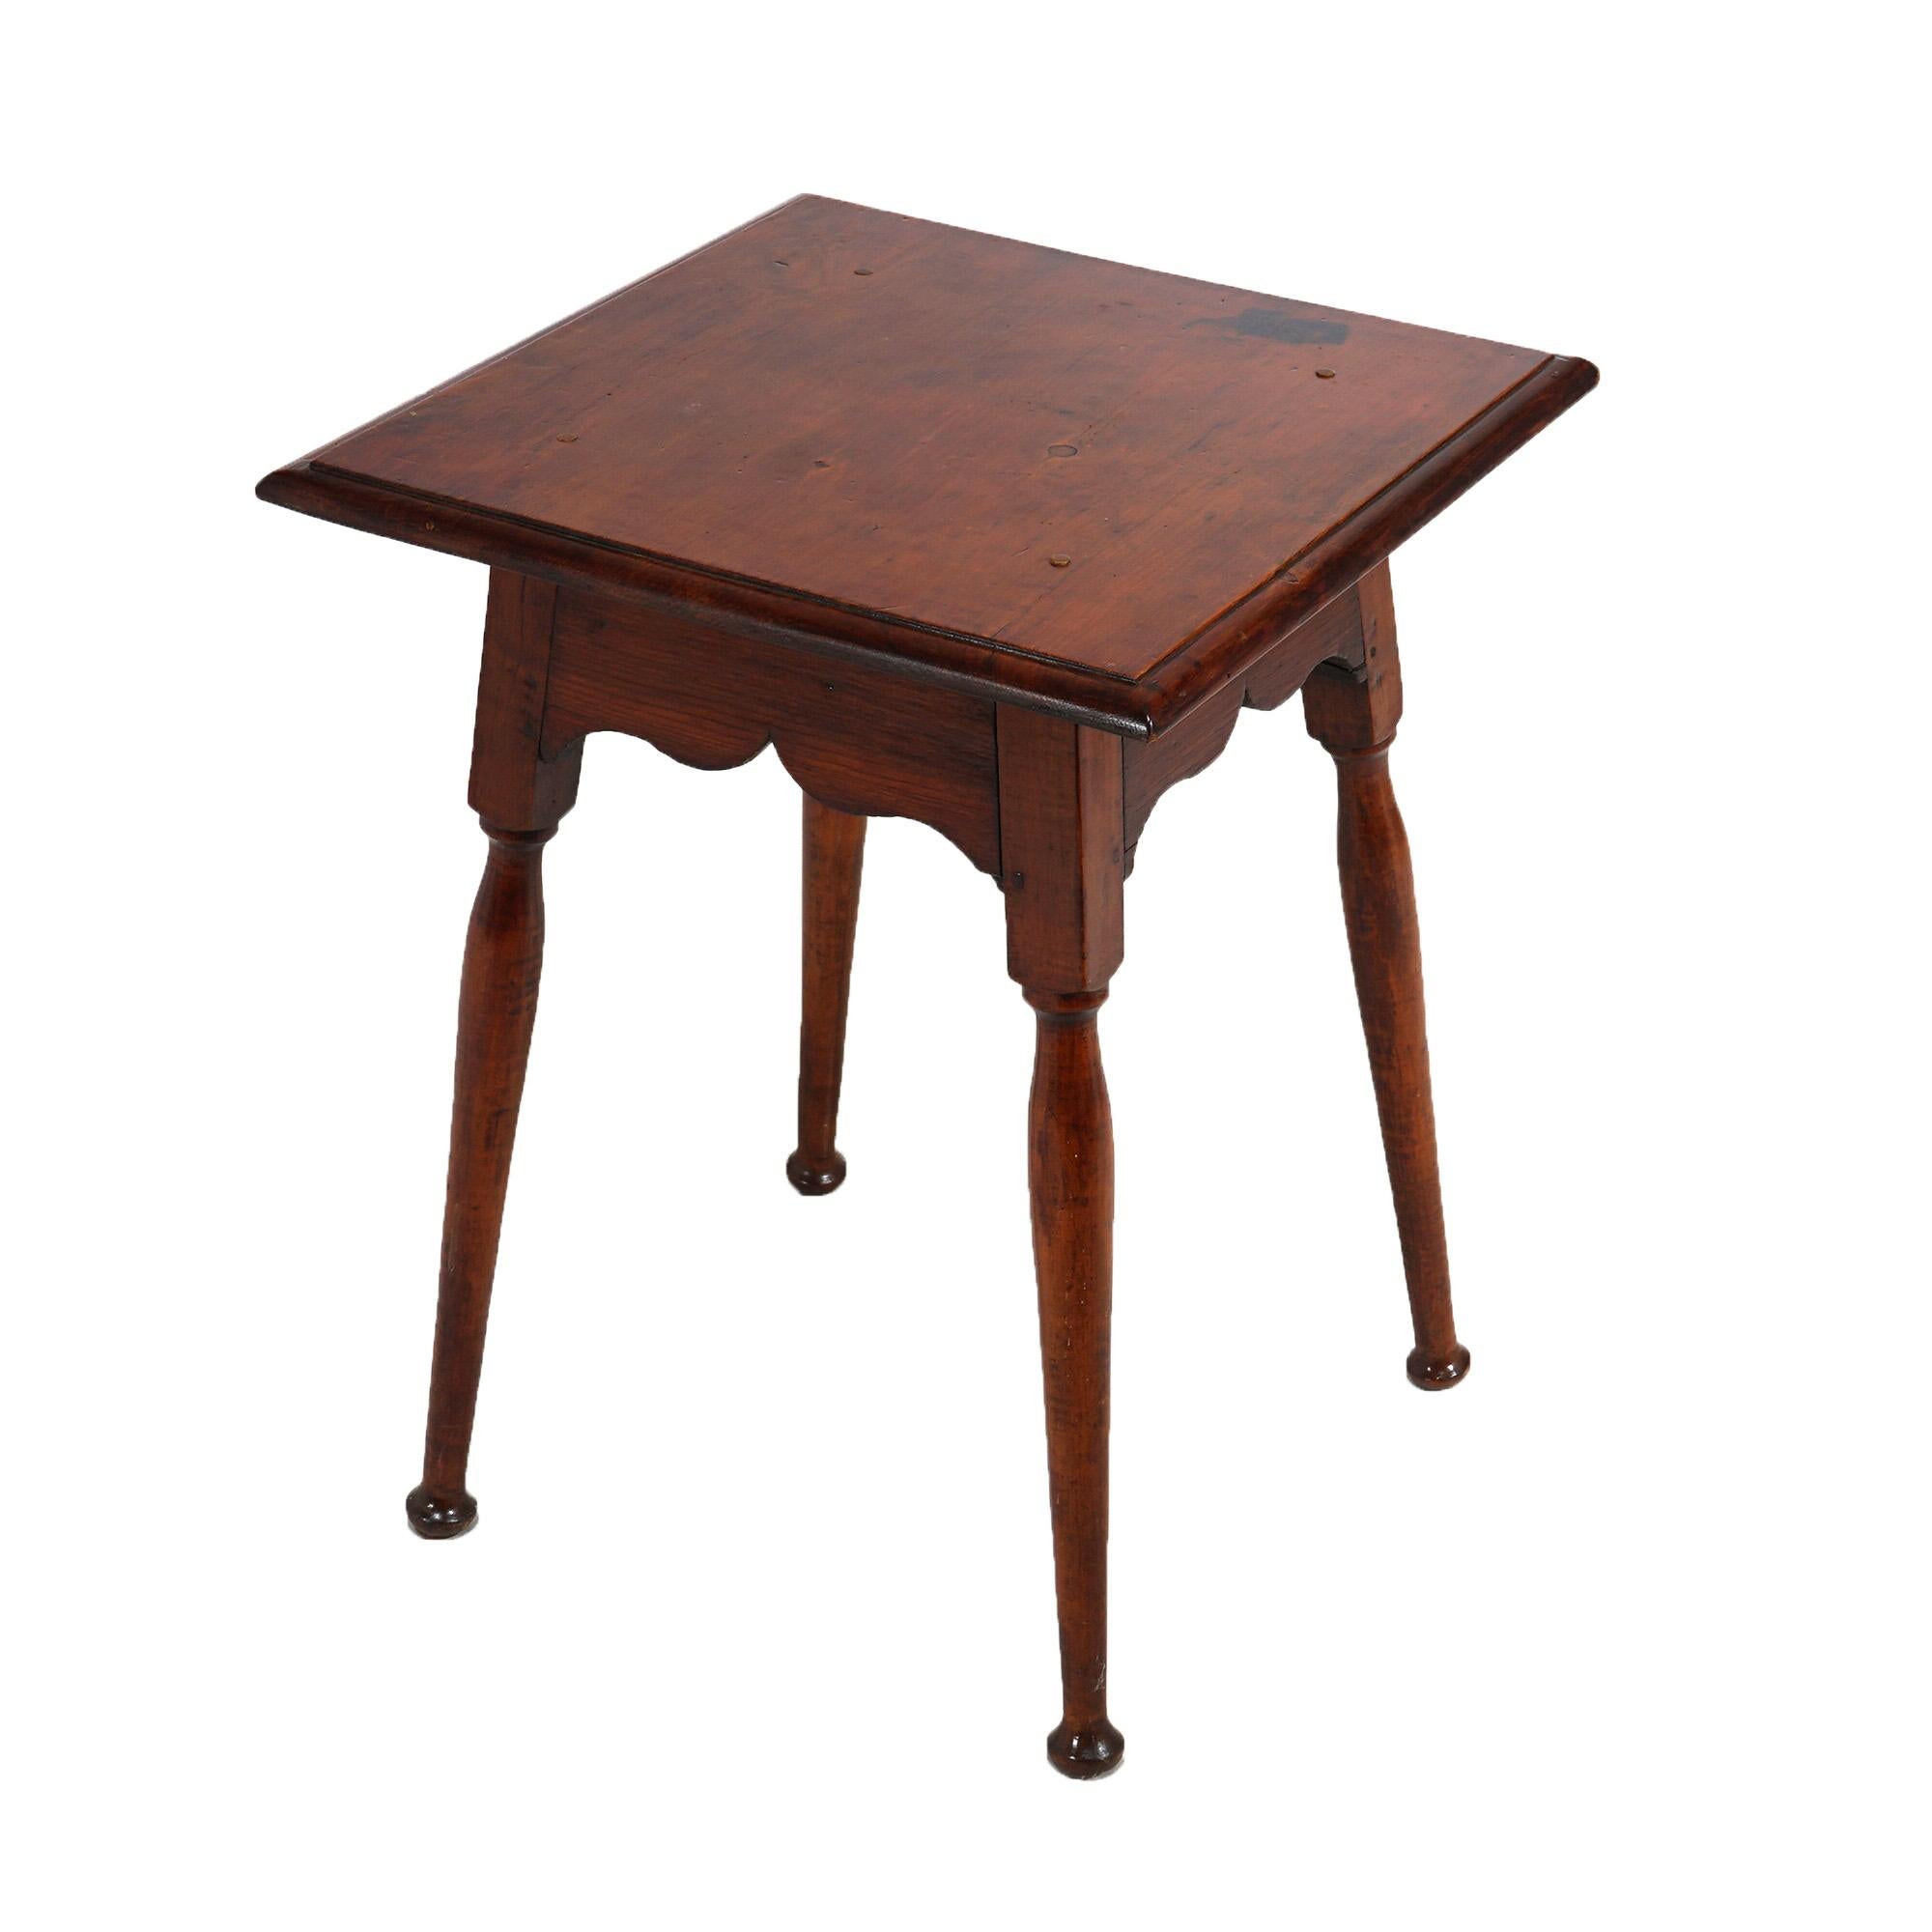 An antique primitive side table in the manner of those produced in early New England offers maple and pine construction with beveled square top over shaped skirt and raised on splayed turned legs, c1810

Measures- 27''H x 21''W x 21''D